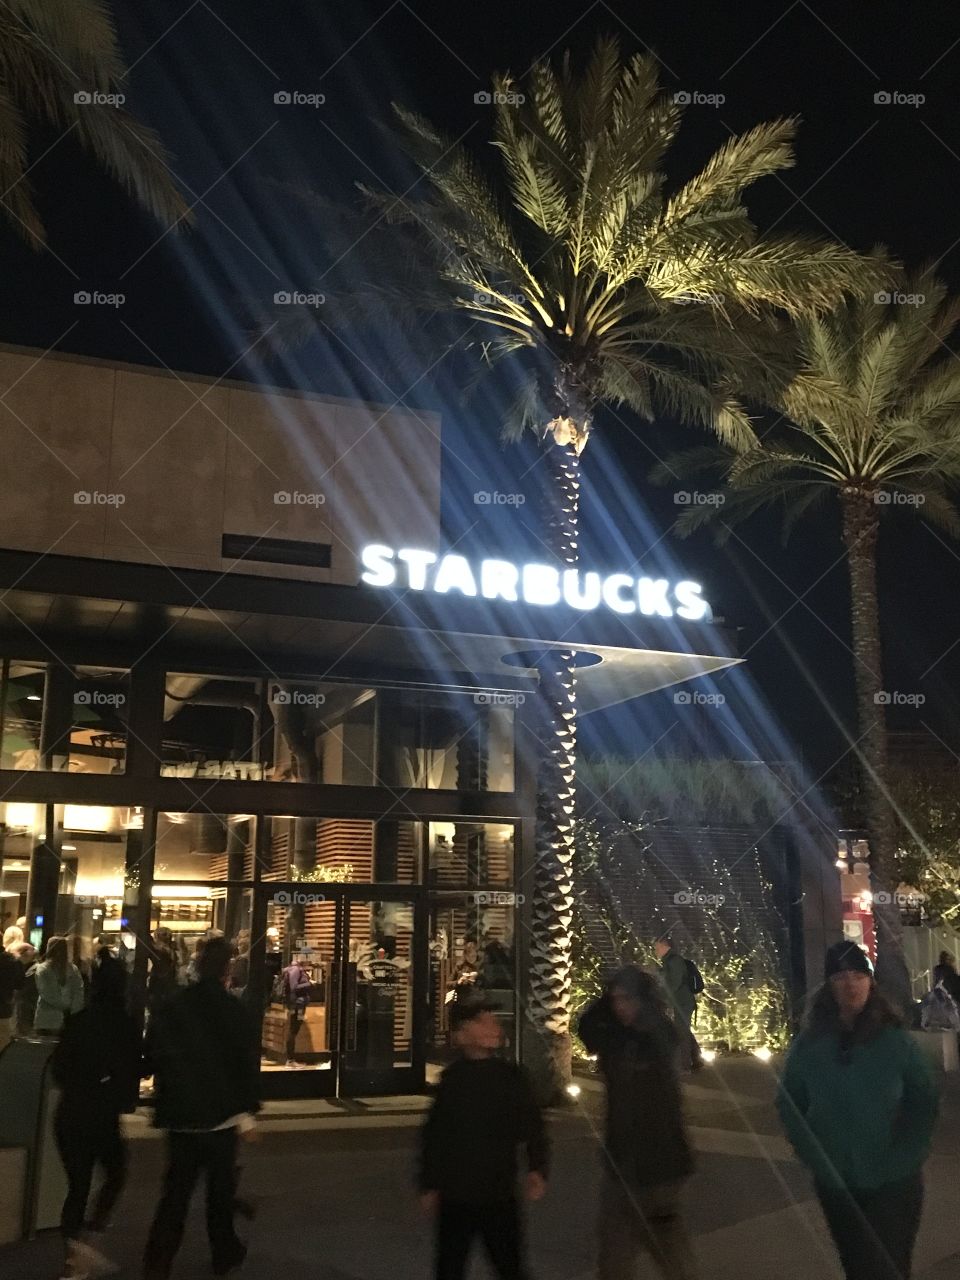 Starbucks overhang designed to let a palm tree grow through it, with illuminated sign and blur effect